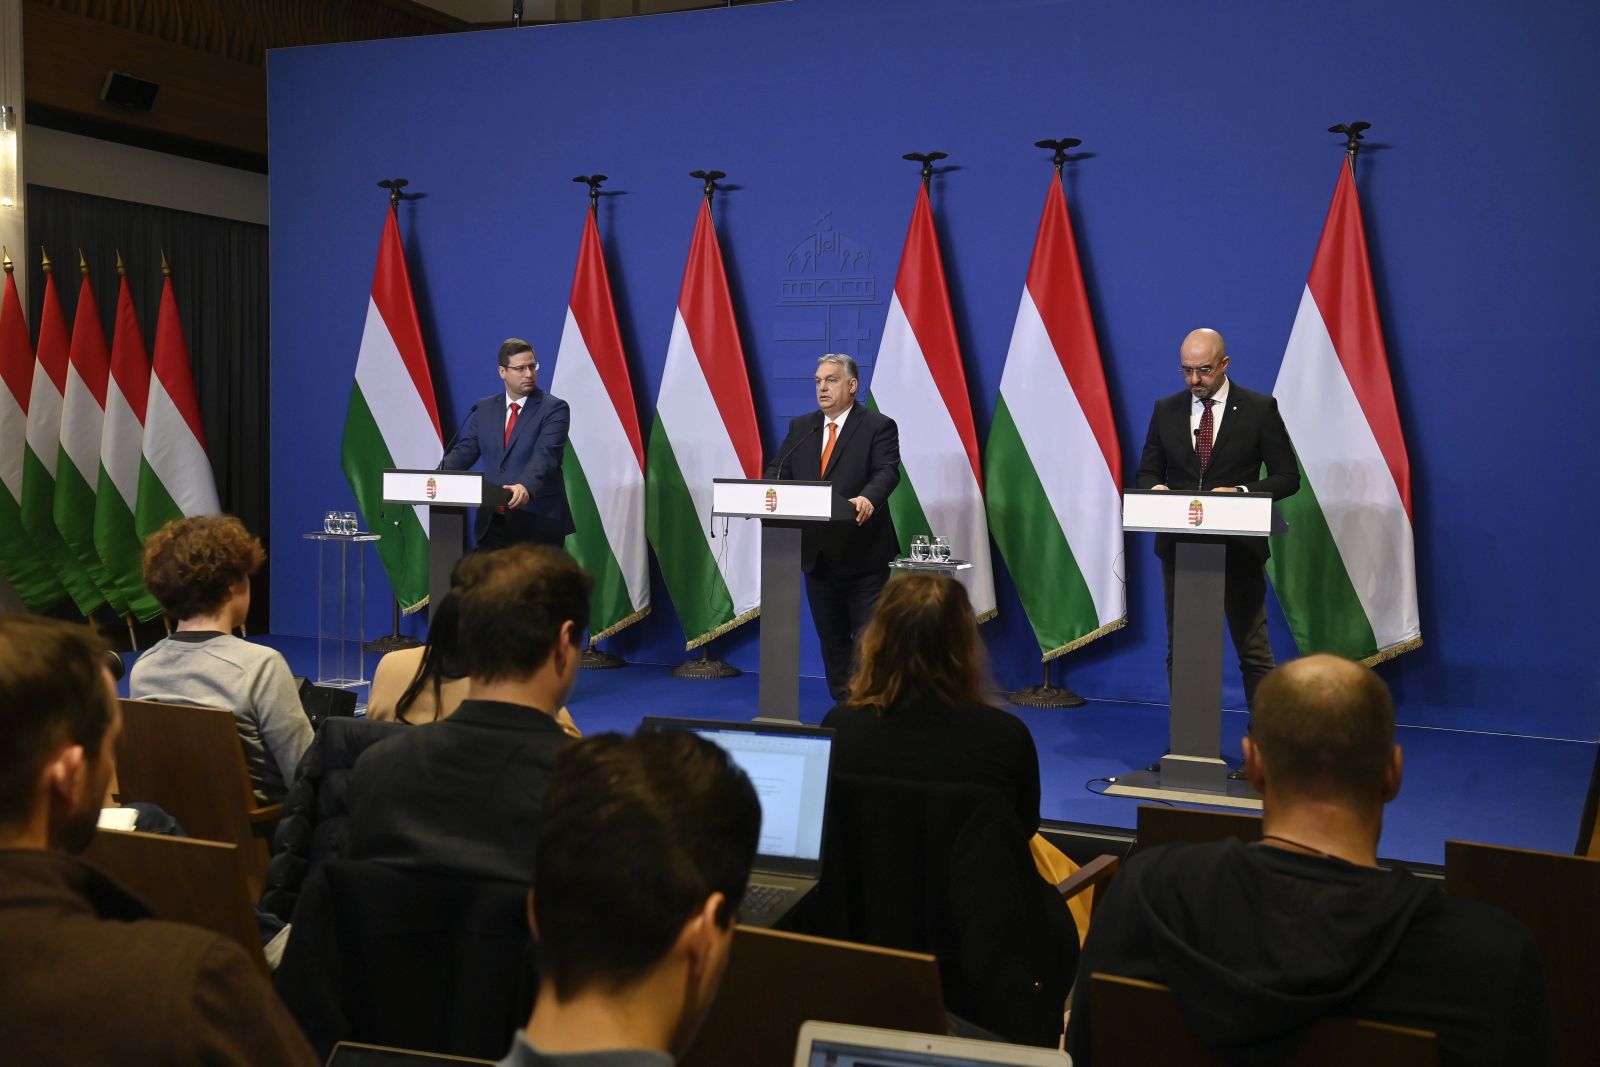 epa10375462 Hungarian Prime Minister Viktor Orban (C), Head of the Prime Minister's Office Gergely Gulyas (L) and Hungarian Secretary of State for International Communication and Relations Zoltan Kovacs (R) hold a year-end press conference in the government's headquarters in Budapest, Hungary, 21 December 2022.  EPA/SZILARD KOSZTICSAK HUNGARY OUT